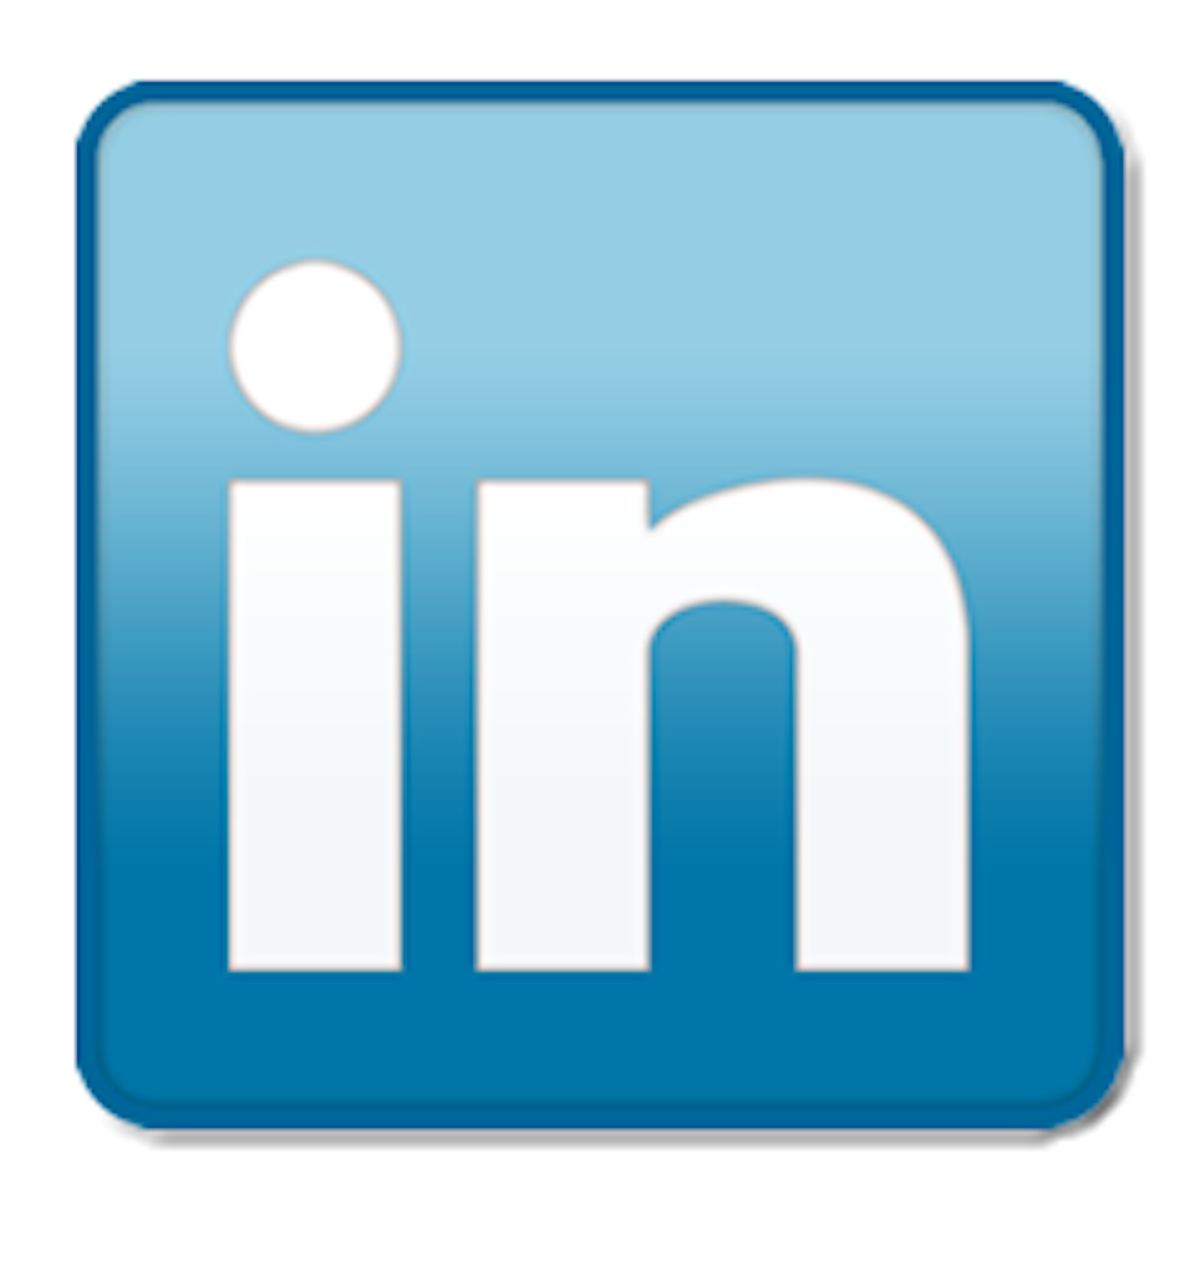  Linkedin Groups To Grow Your Connections